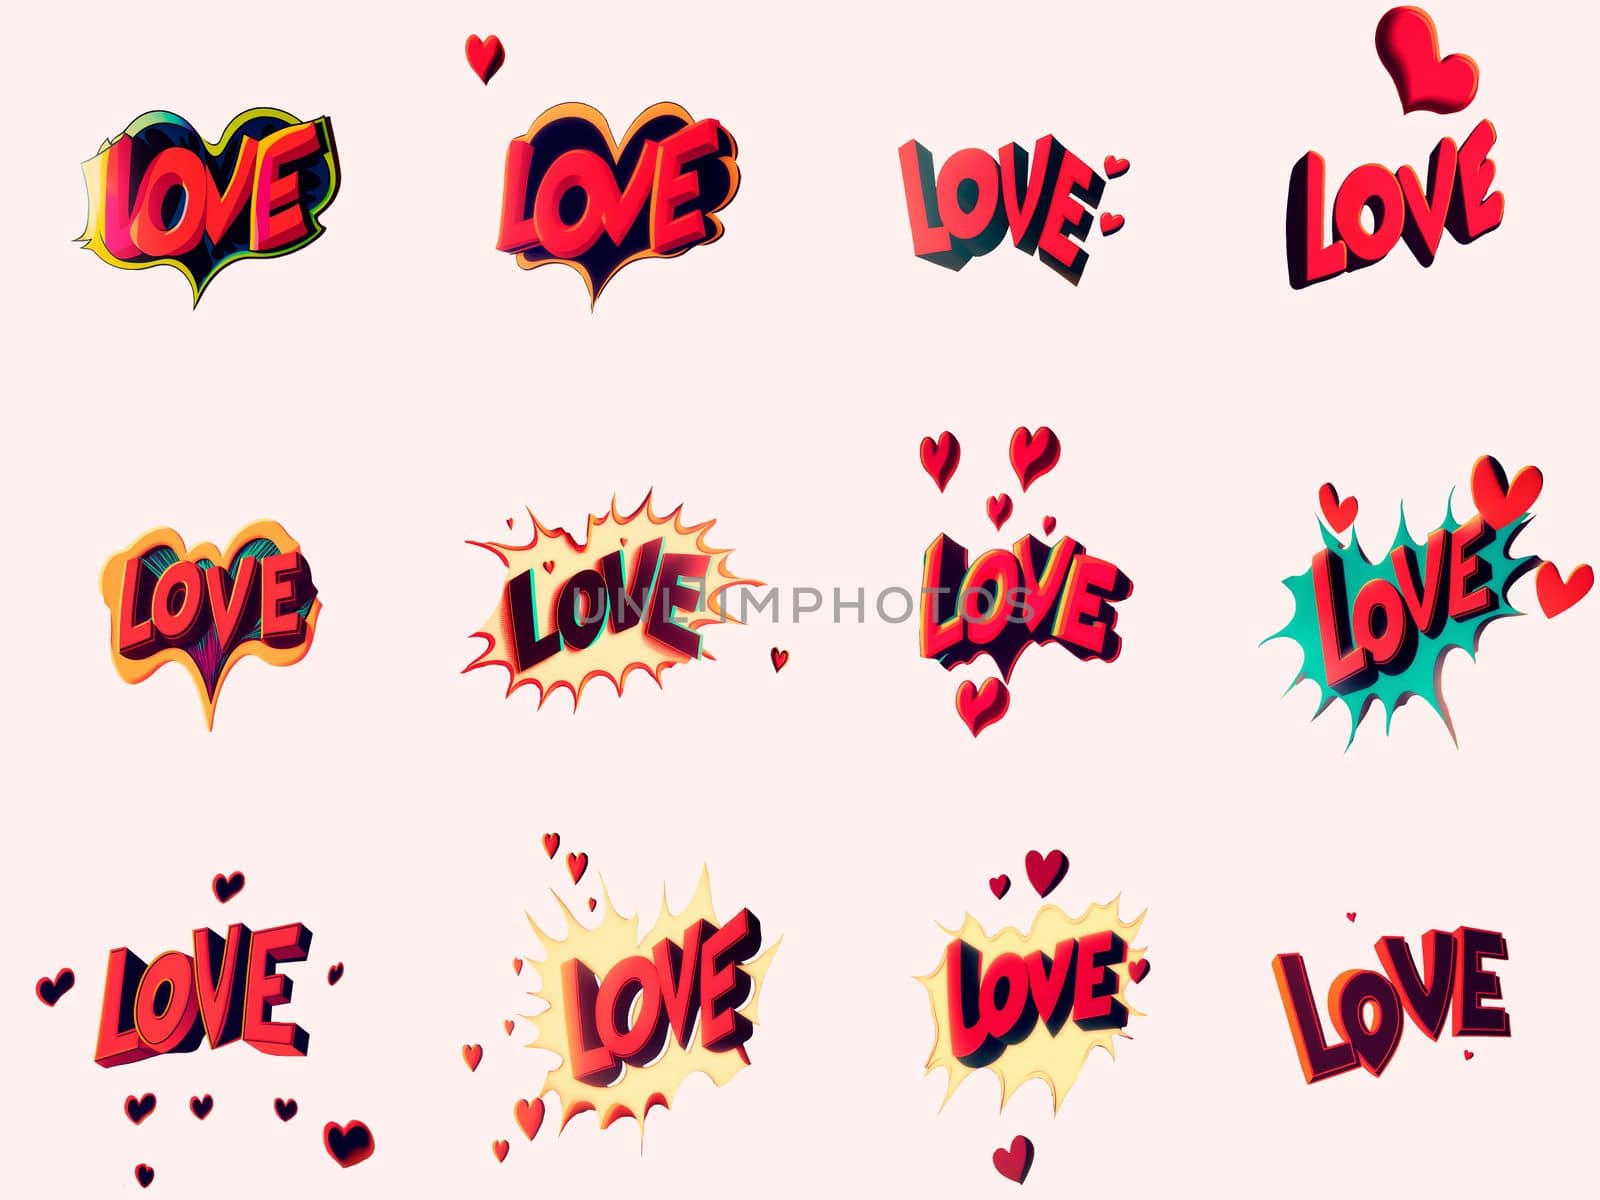 A selection of emblems with the word Love in the styles of comics and pop art